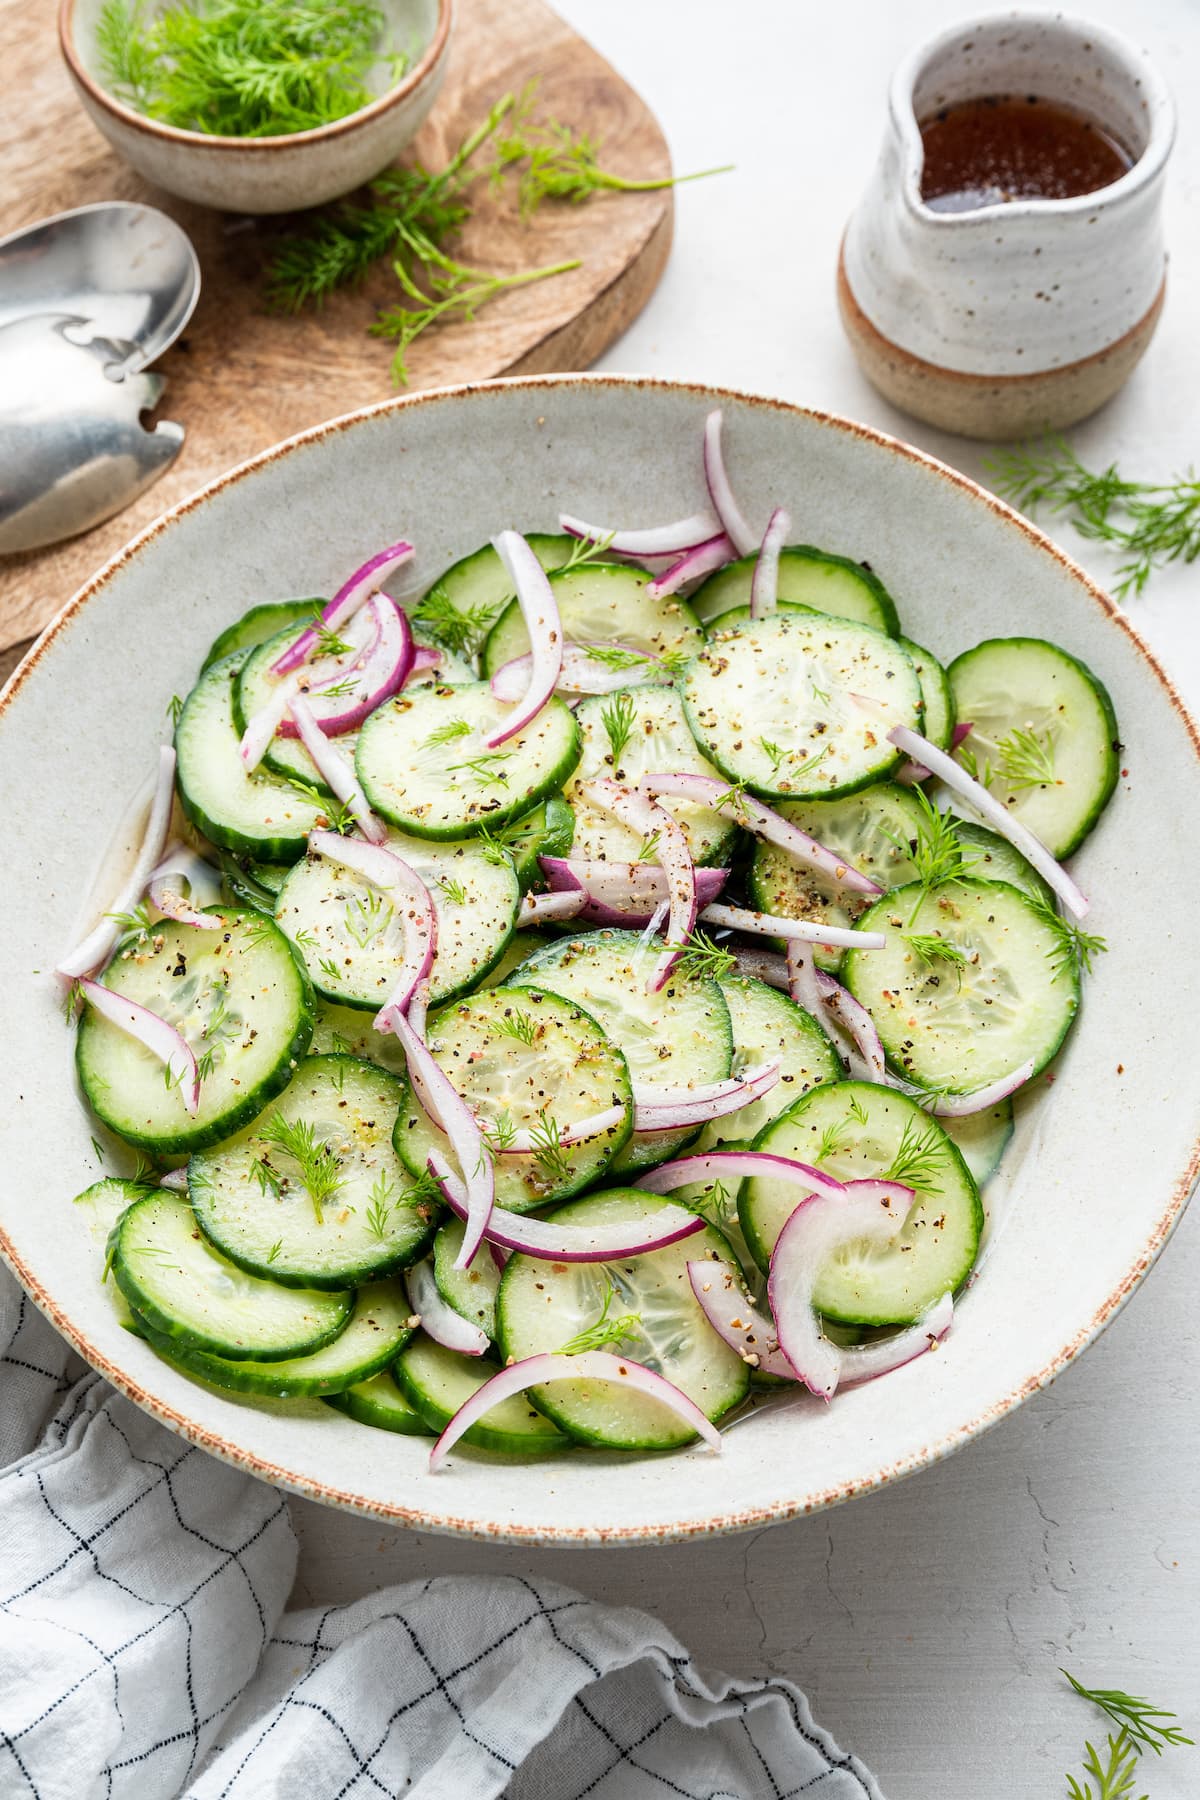 Cucumber salad in a white bowl with cucumber slices, red onion and vinaigrette.